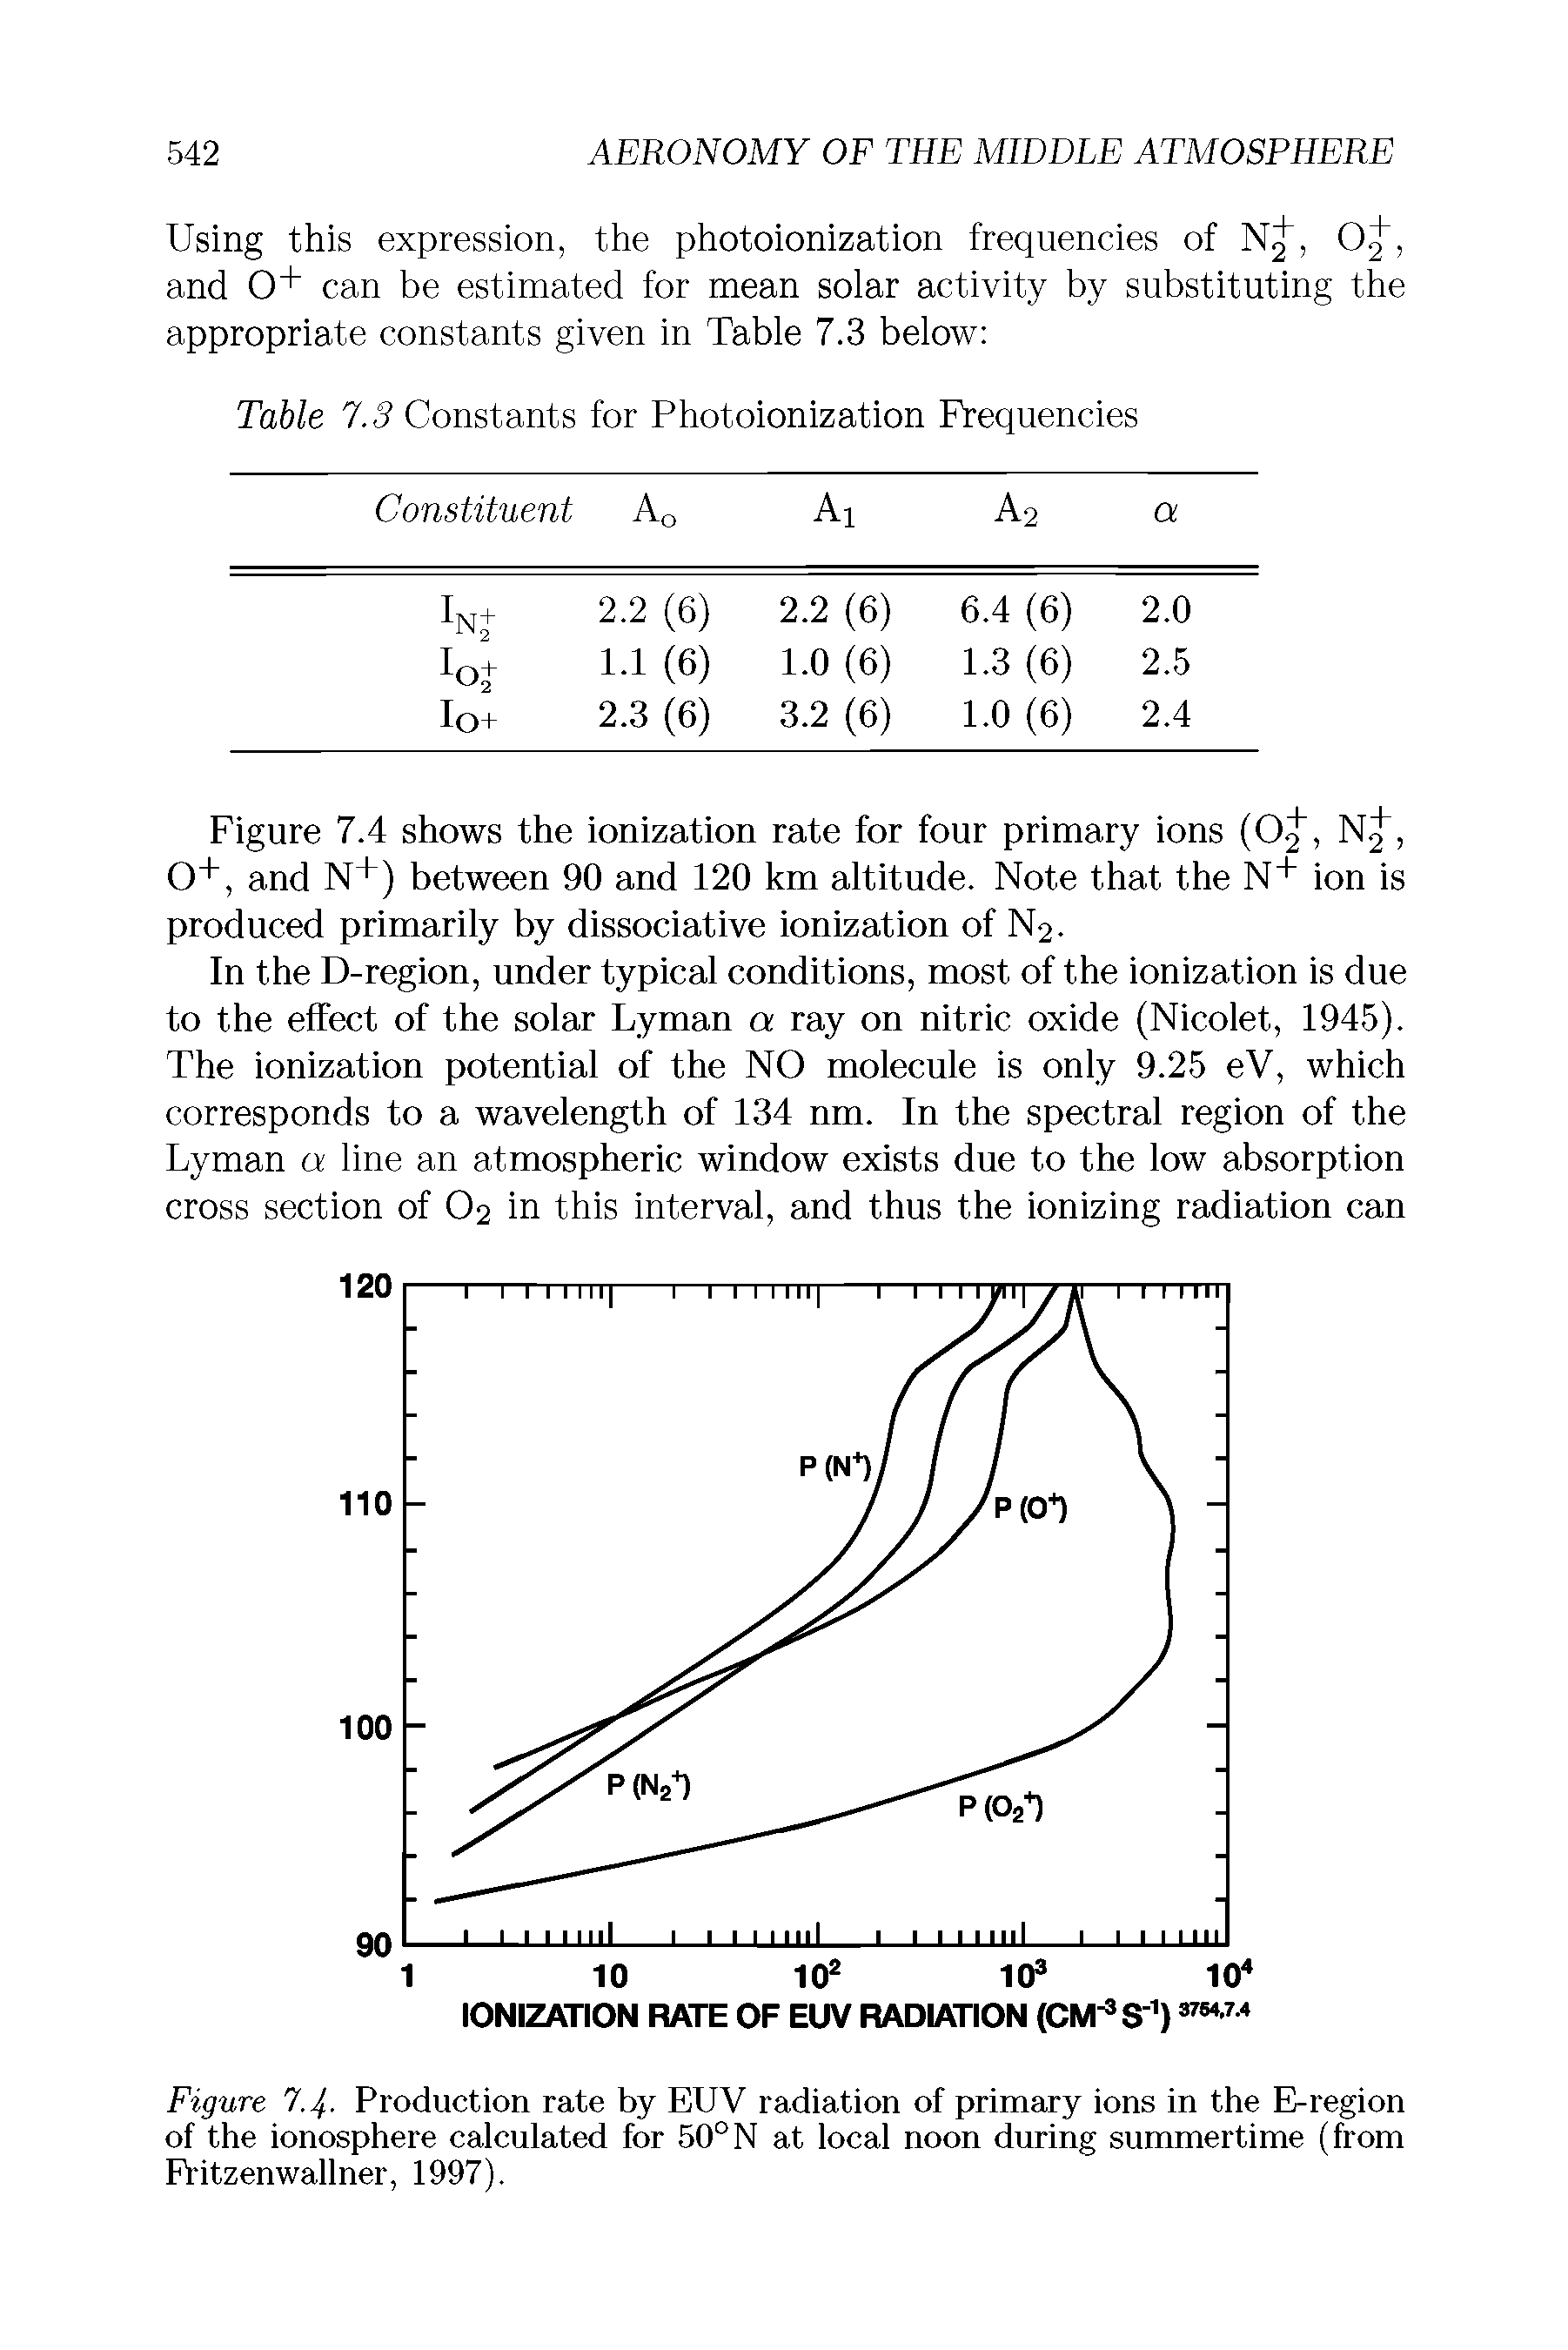 Figure 7.4. Production rate by EUV radiation of primary ions in the E-region of the ionosphere calculated for 50°N at local noon during summertime (from Fritzenwallner, 1997).